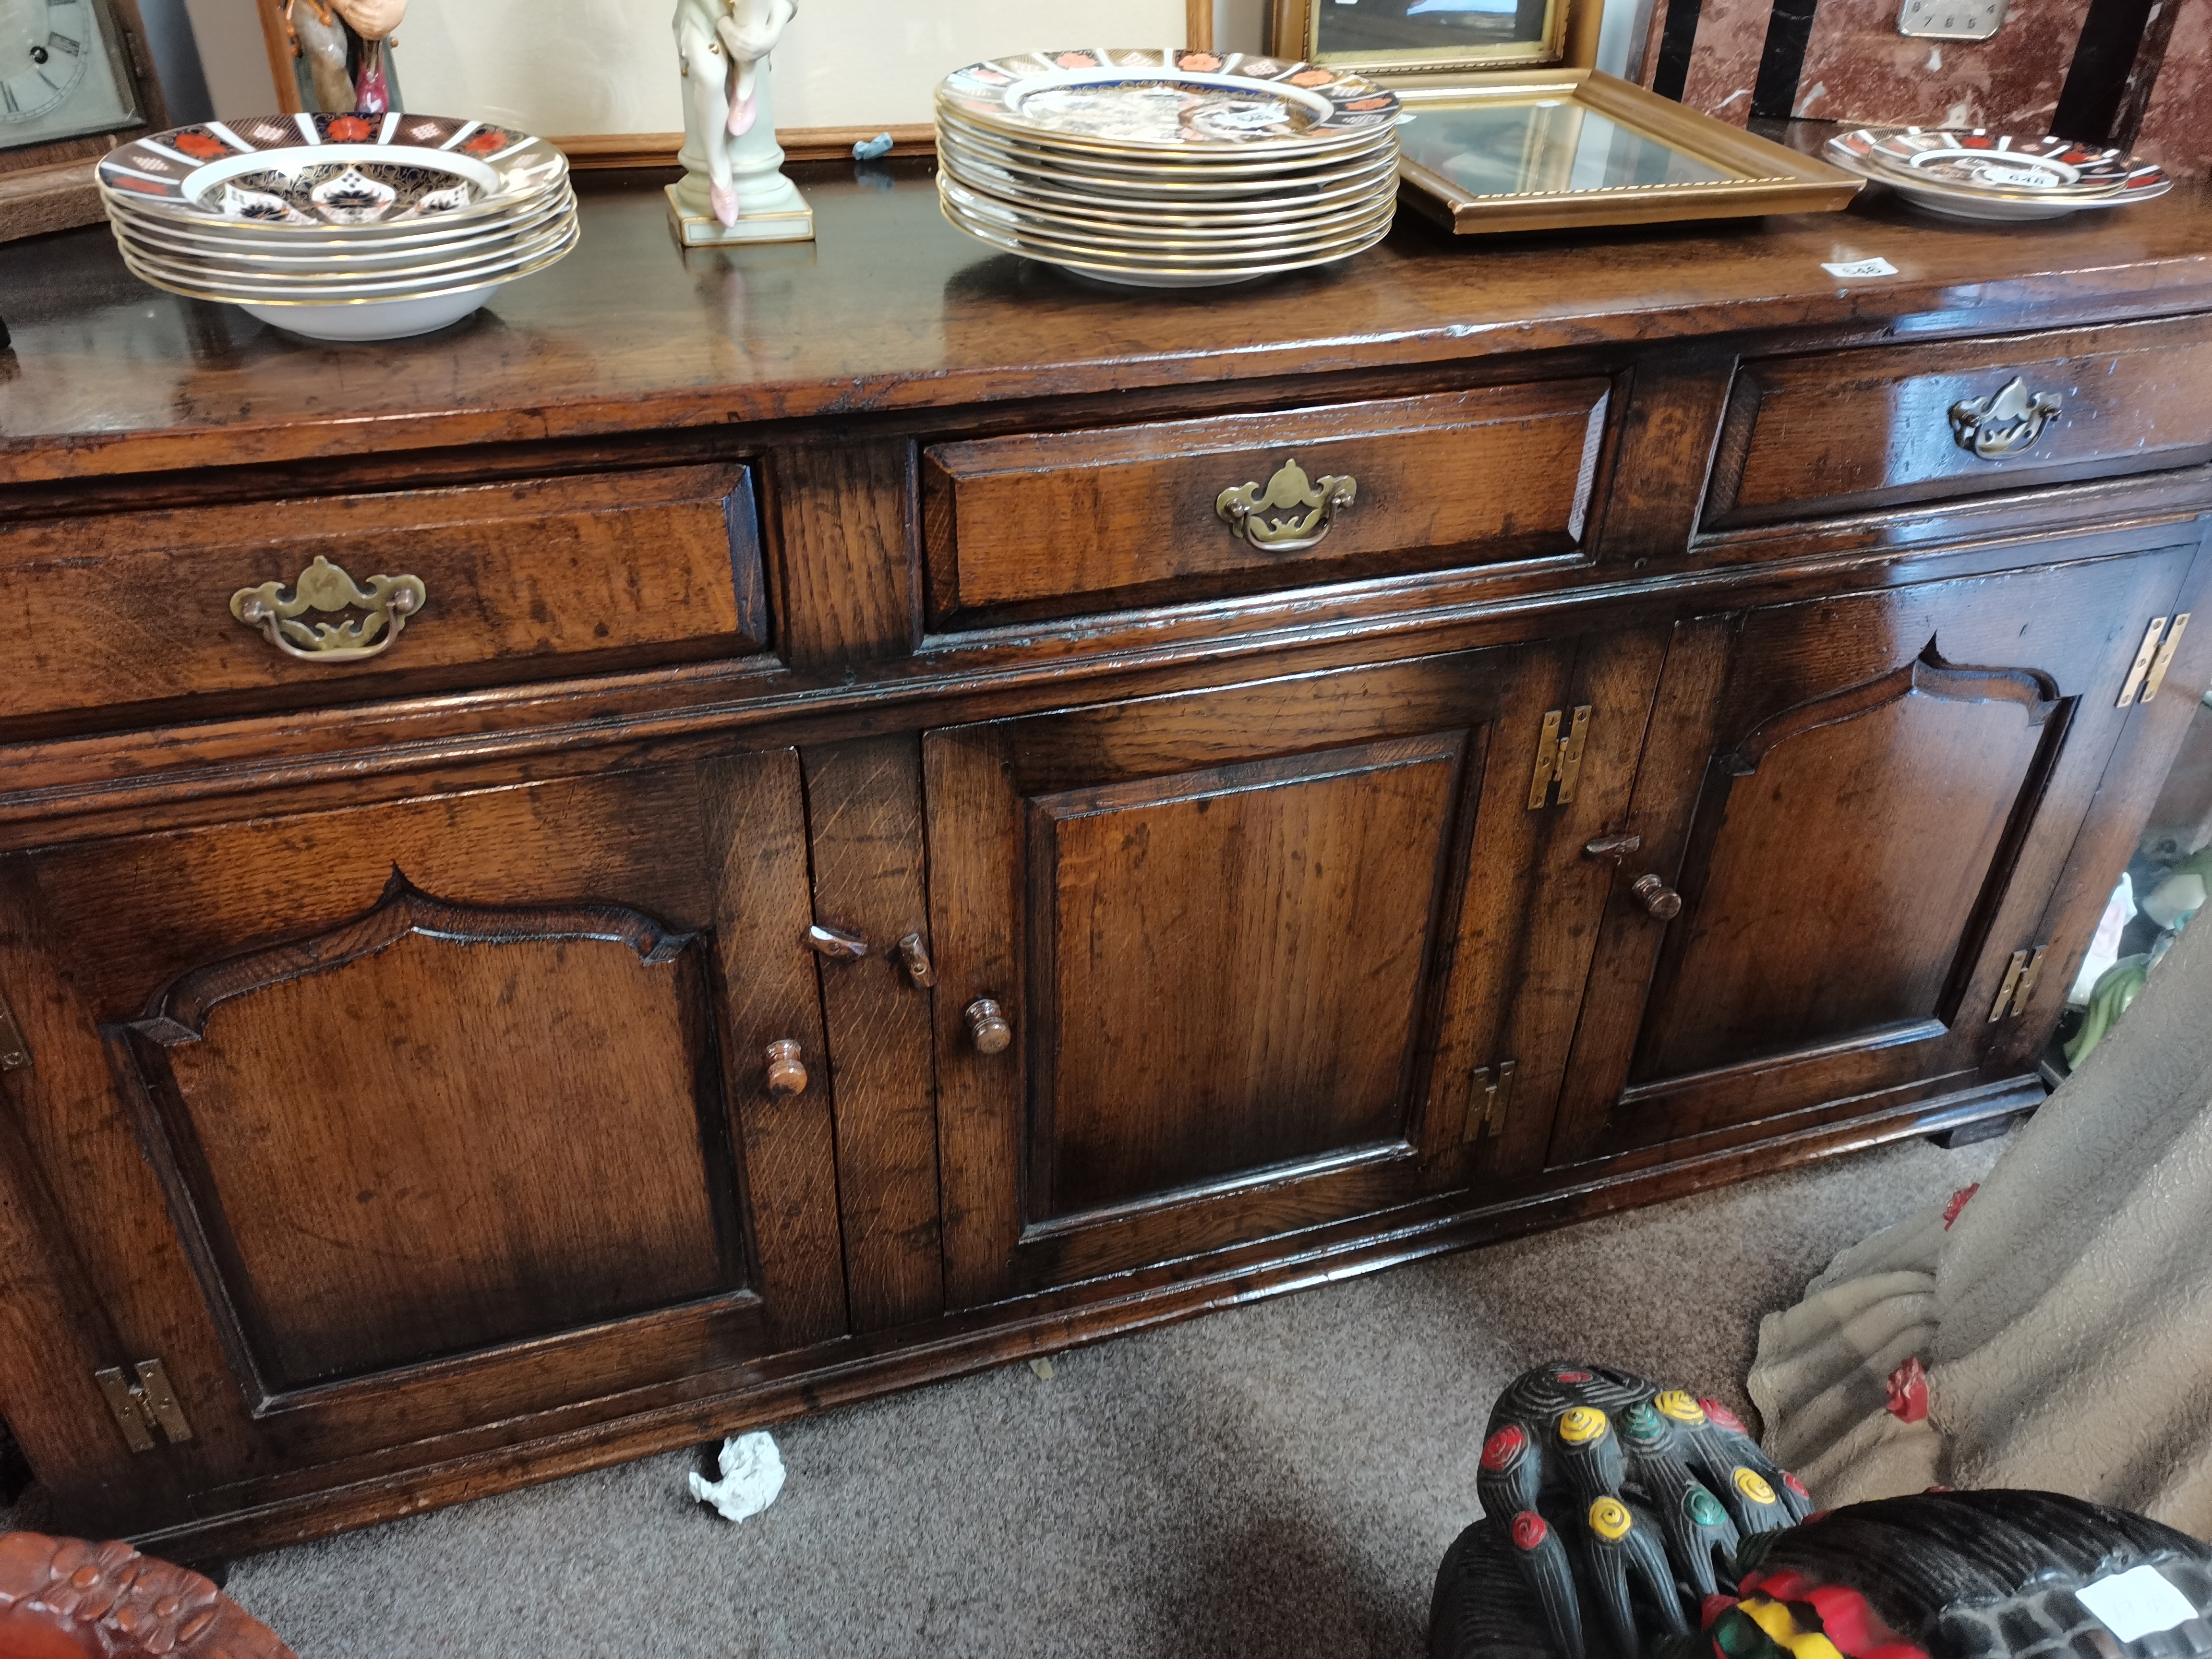 Tichmarsh and goodwin 1.7m long oak sideboard ex. Condition - Image 2 of 2